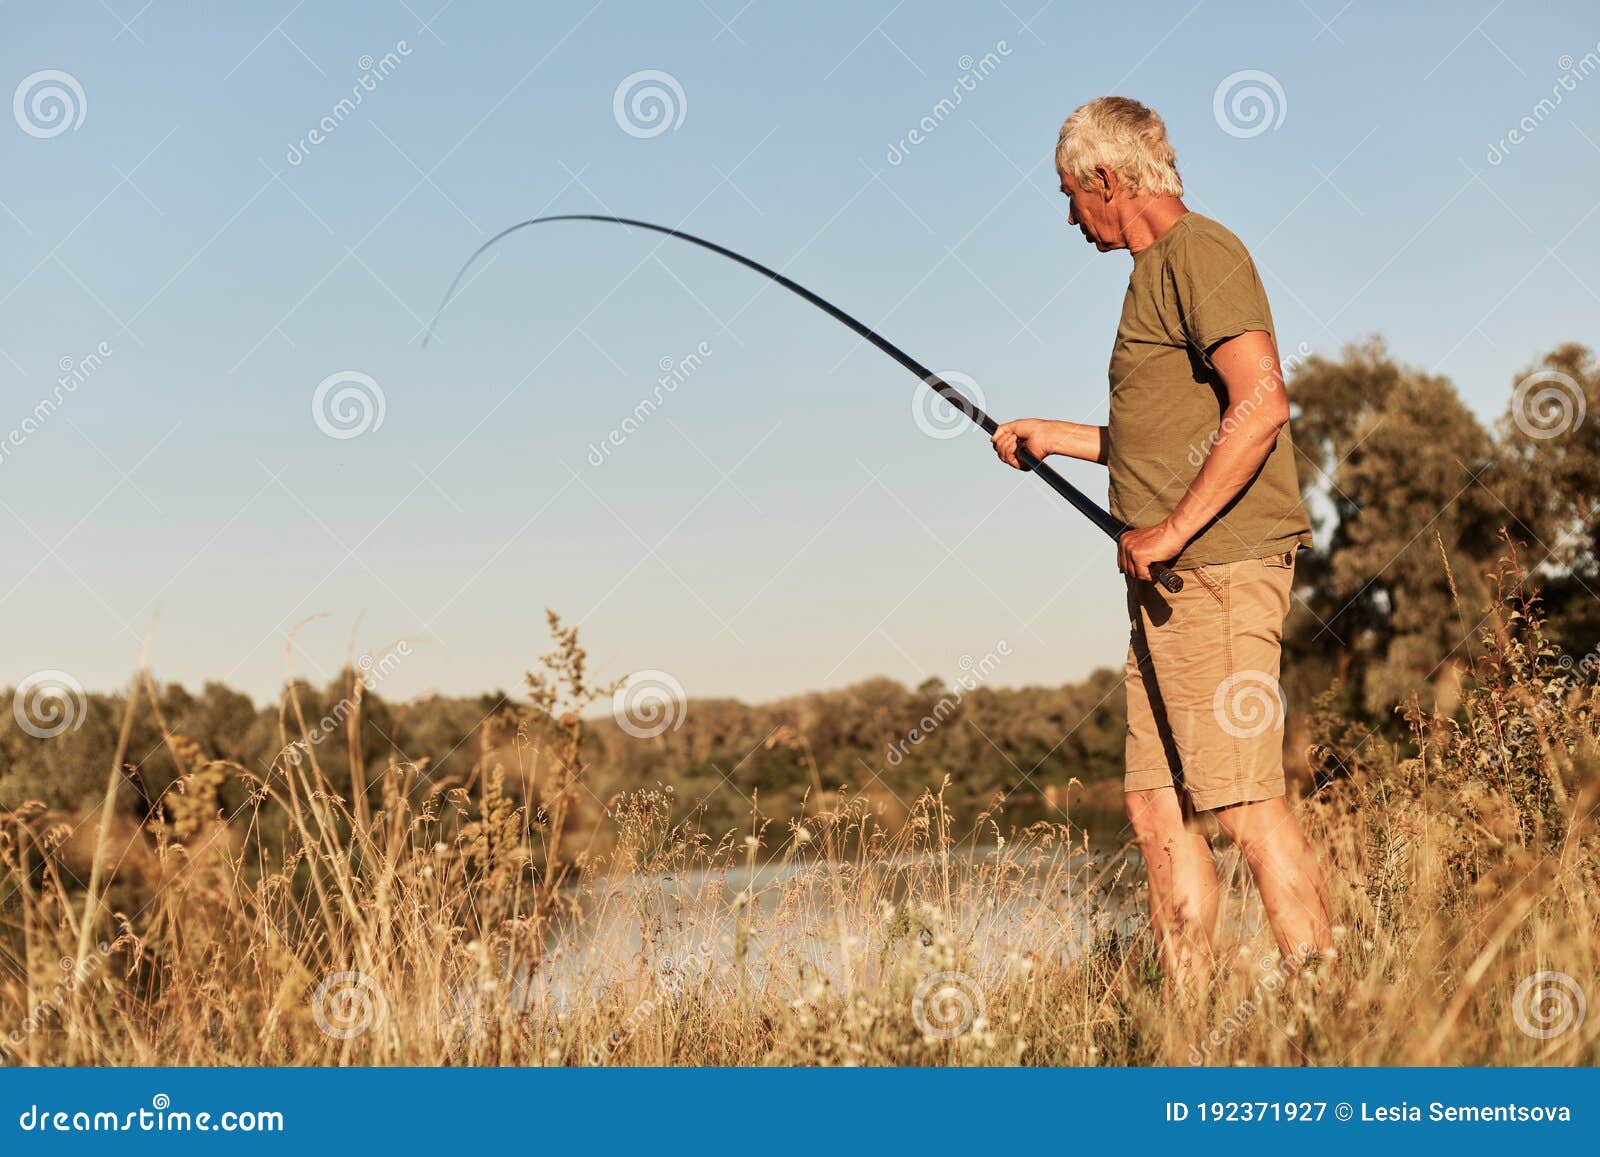 Senior Man Fishing, Holding Fishing Pole in Hands, Wearing Green T Shirt  and Short, Looking at Bobber and Pulling Out Fish, Stock Image - Image of  enjoying, breakwater: 192371927